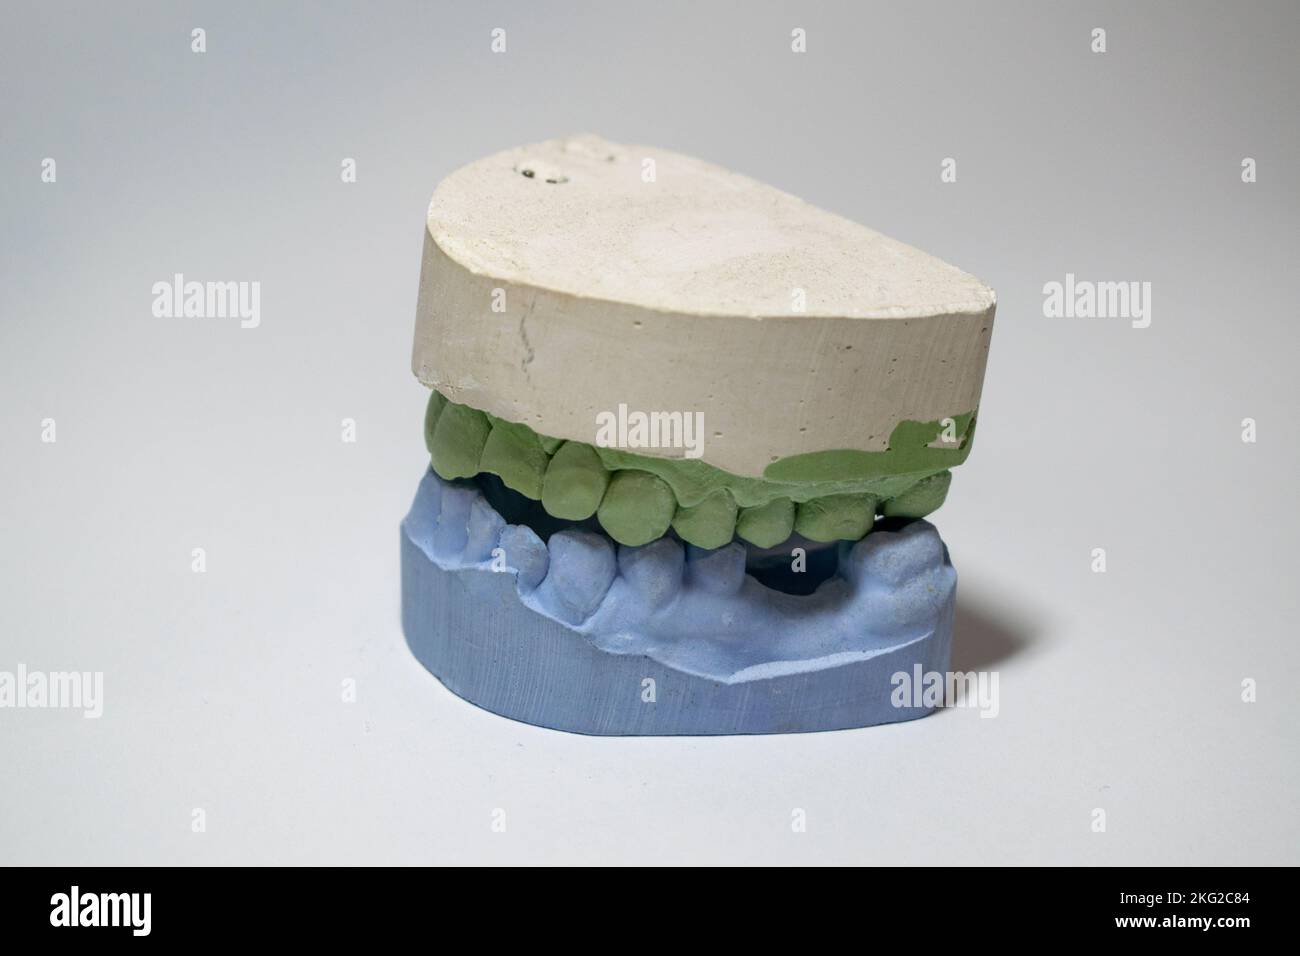 Plaster impressions of the teeth of the lower and upper jaws for prosthetics and implantation in dentistry. Stock Photo